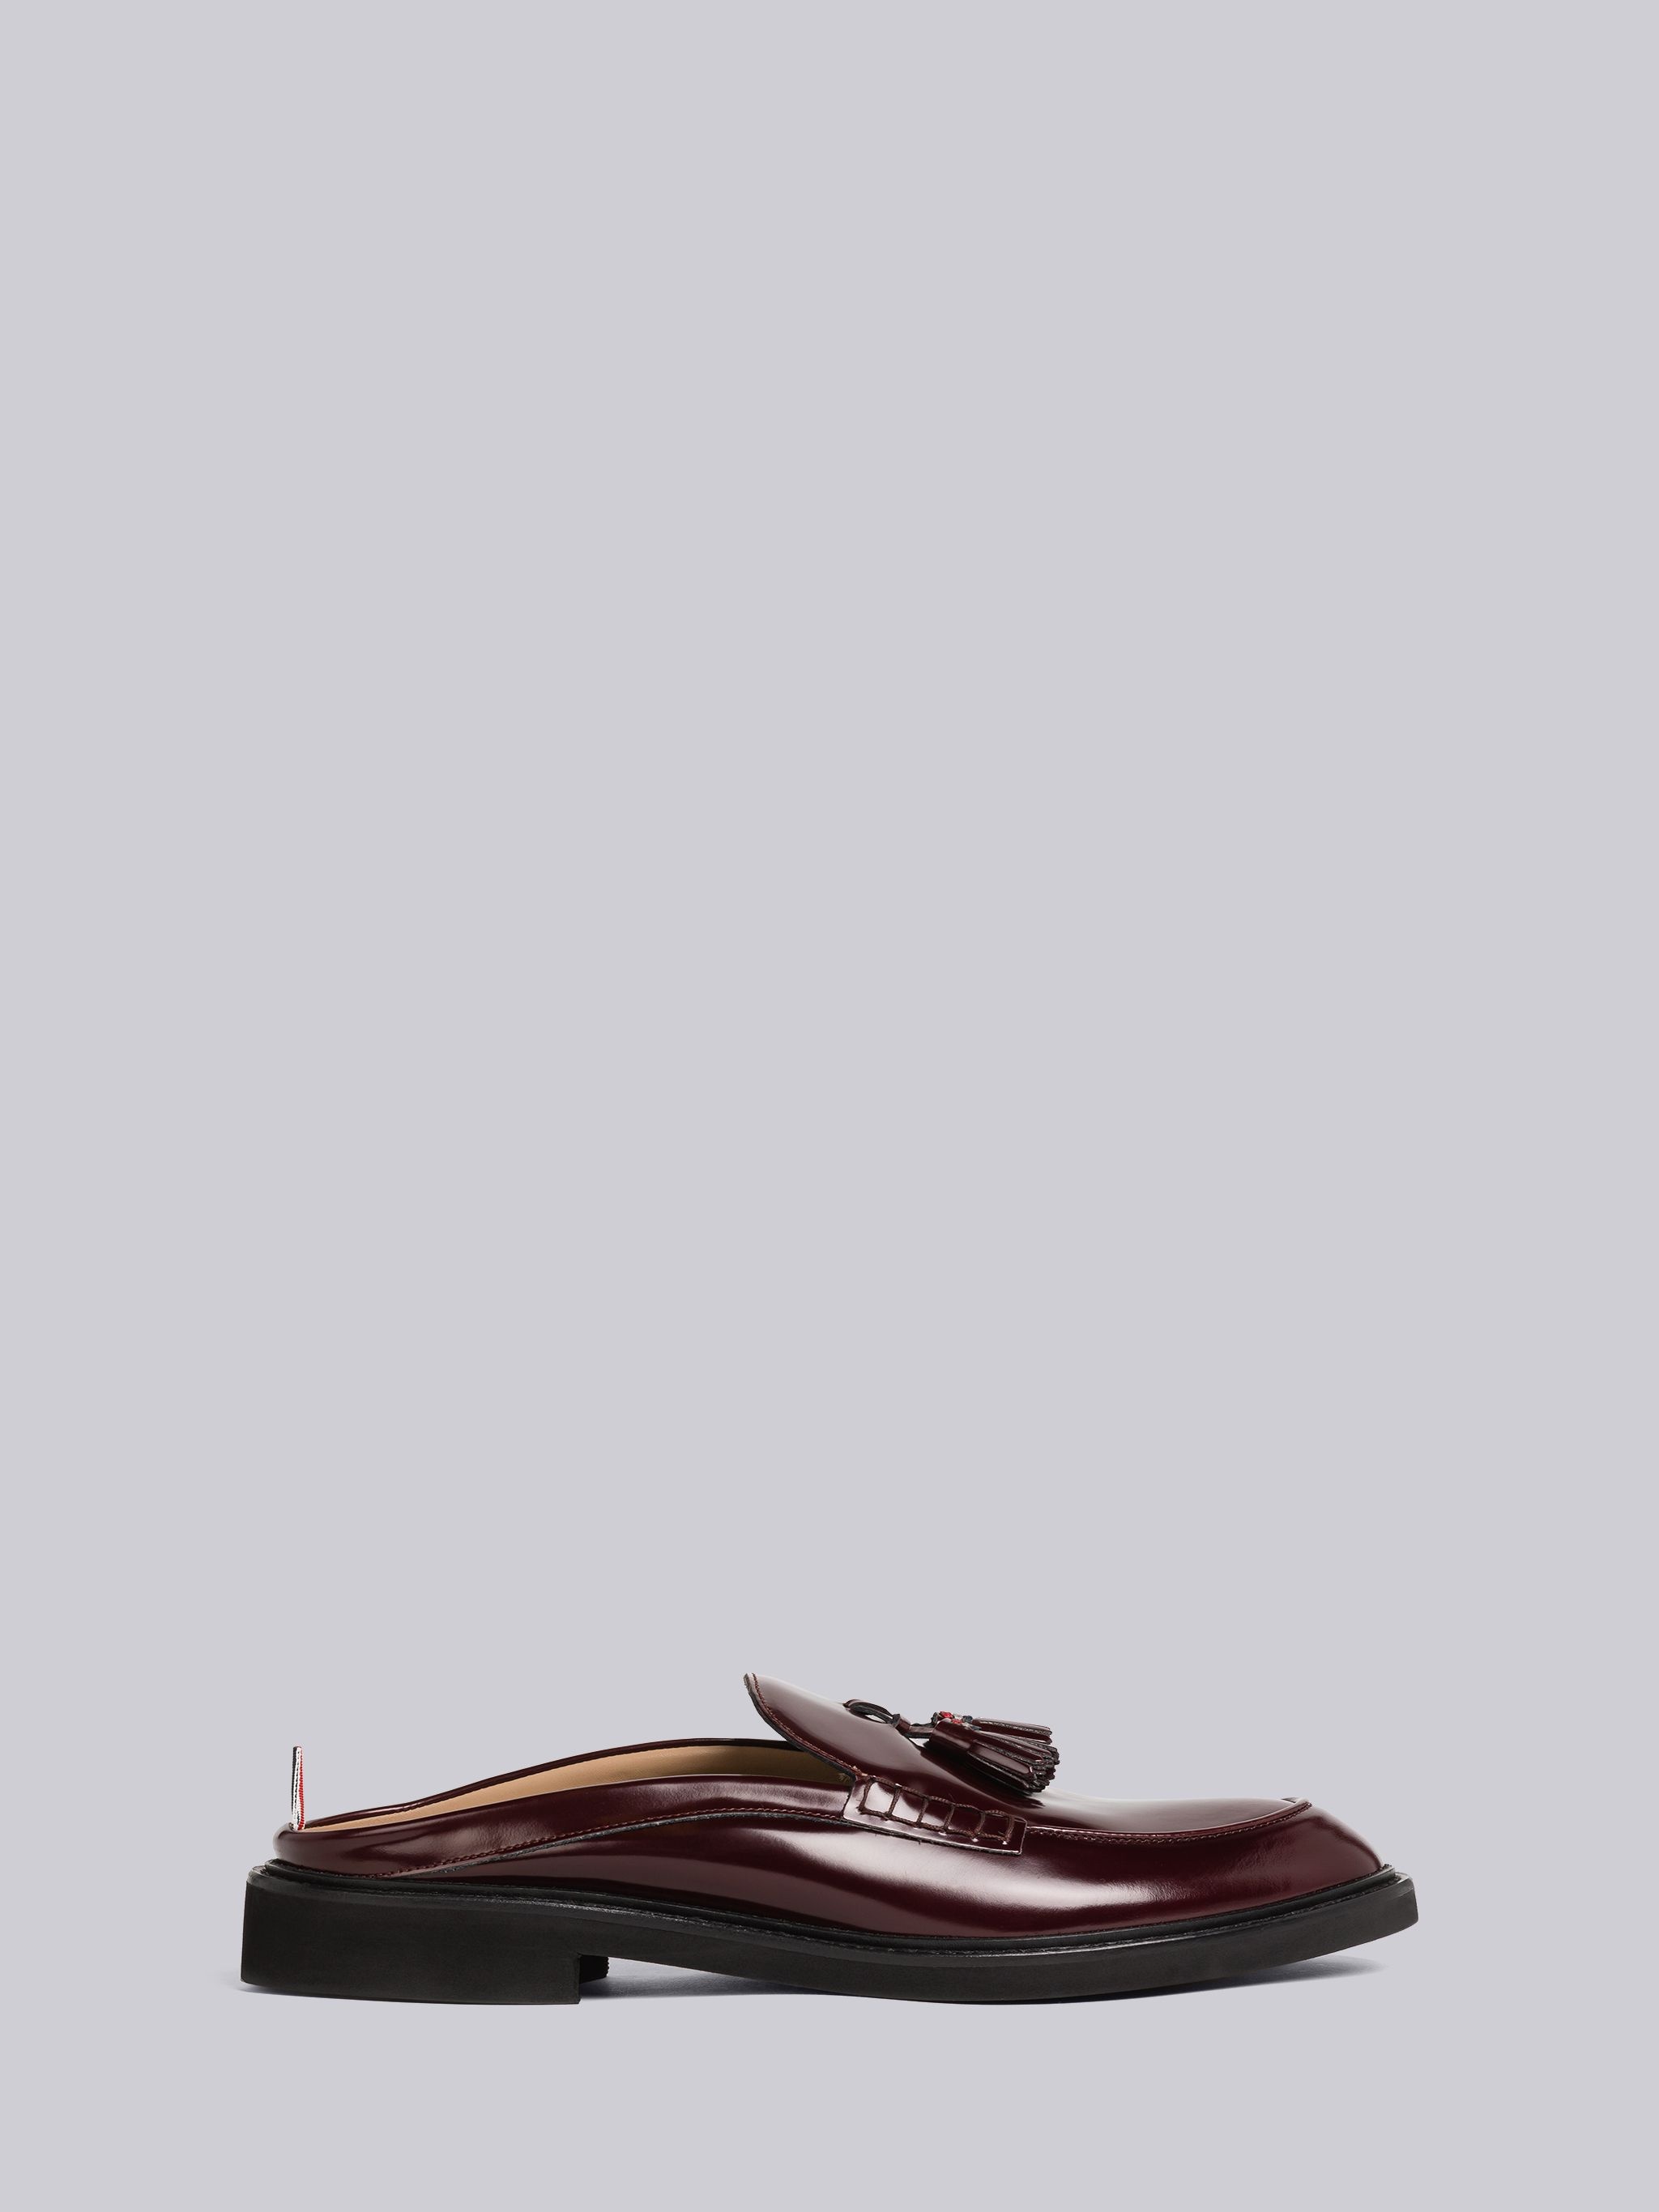 Soft Patent Leather Tassel Loafer Mule - 1